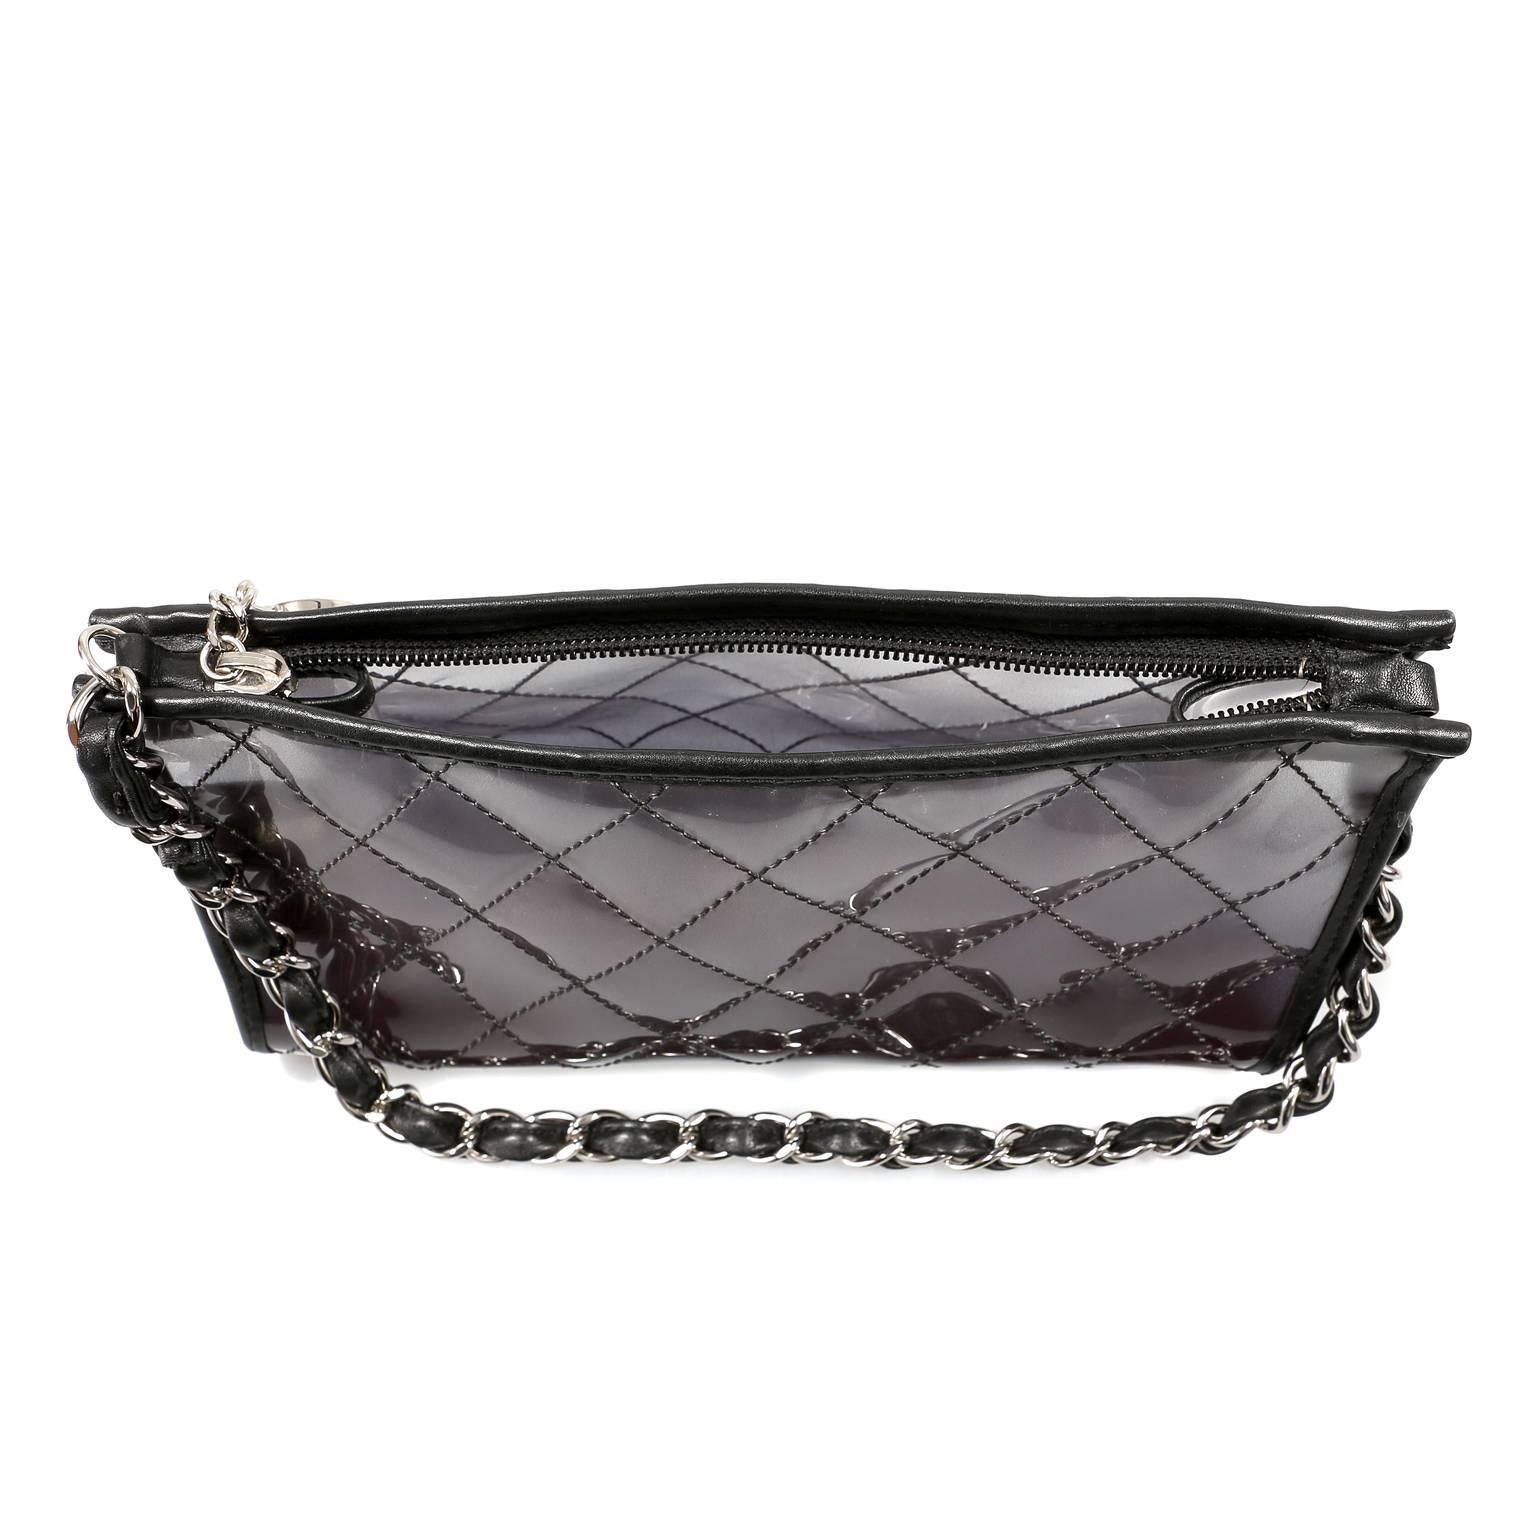 Chanel Smoked Lucite Bag 2